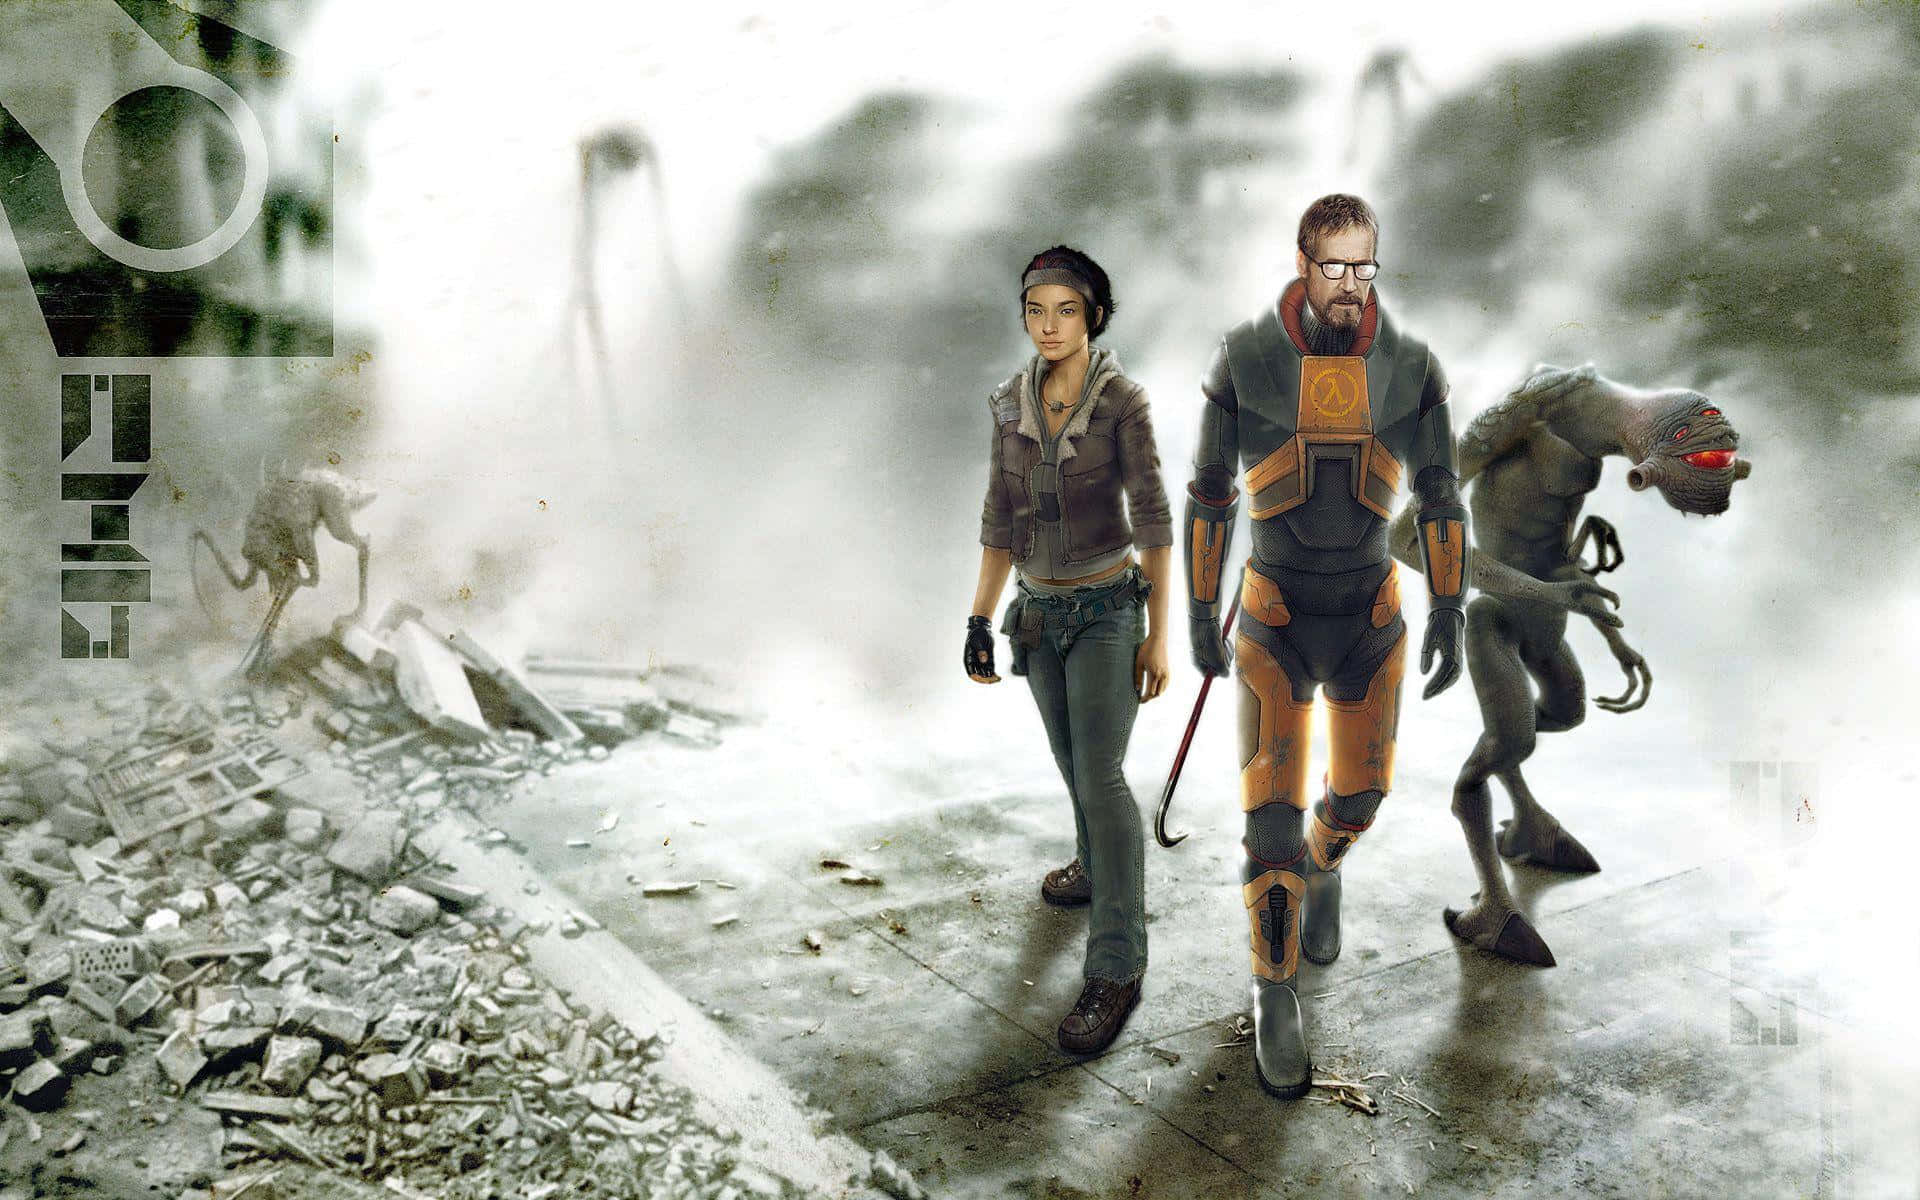 Prepare to take action in the dystopian world of Half-Life 2 Wallpaper